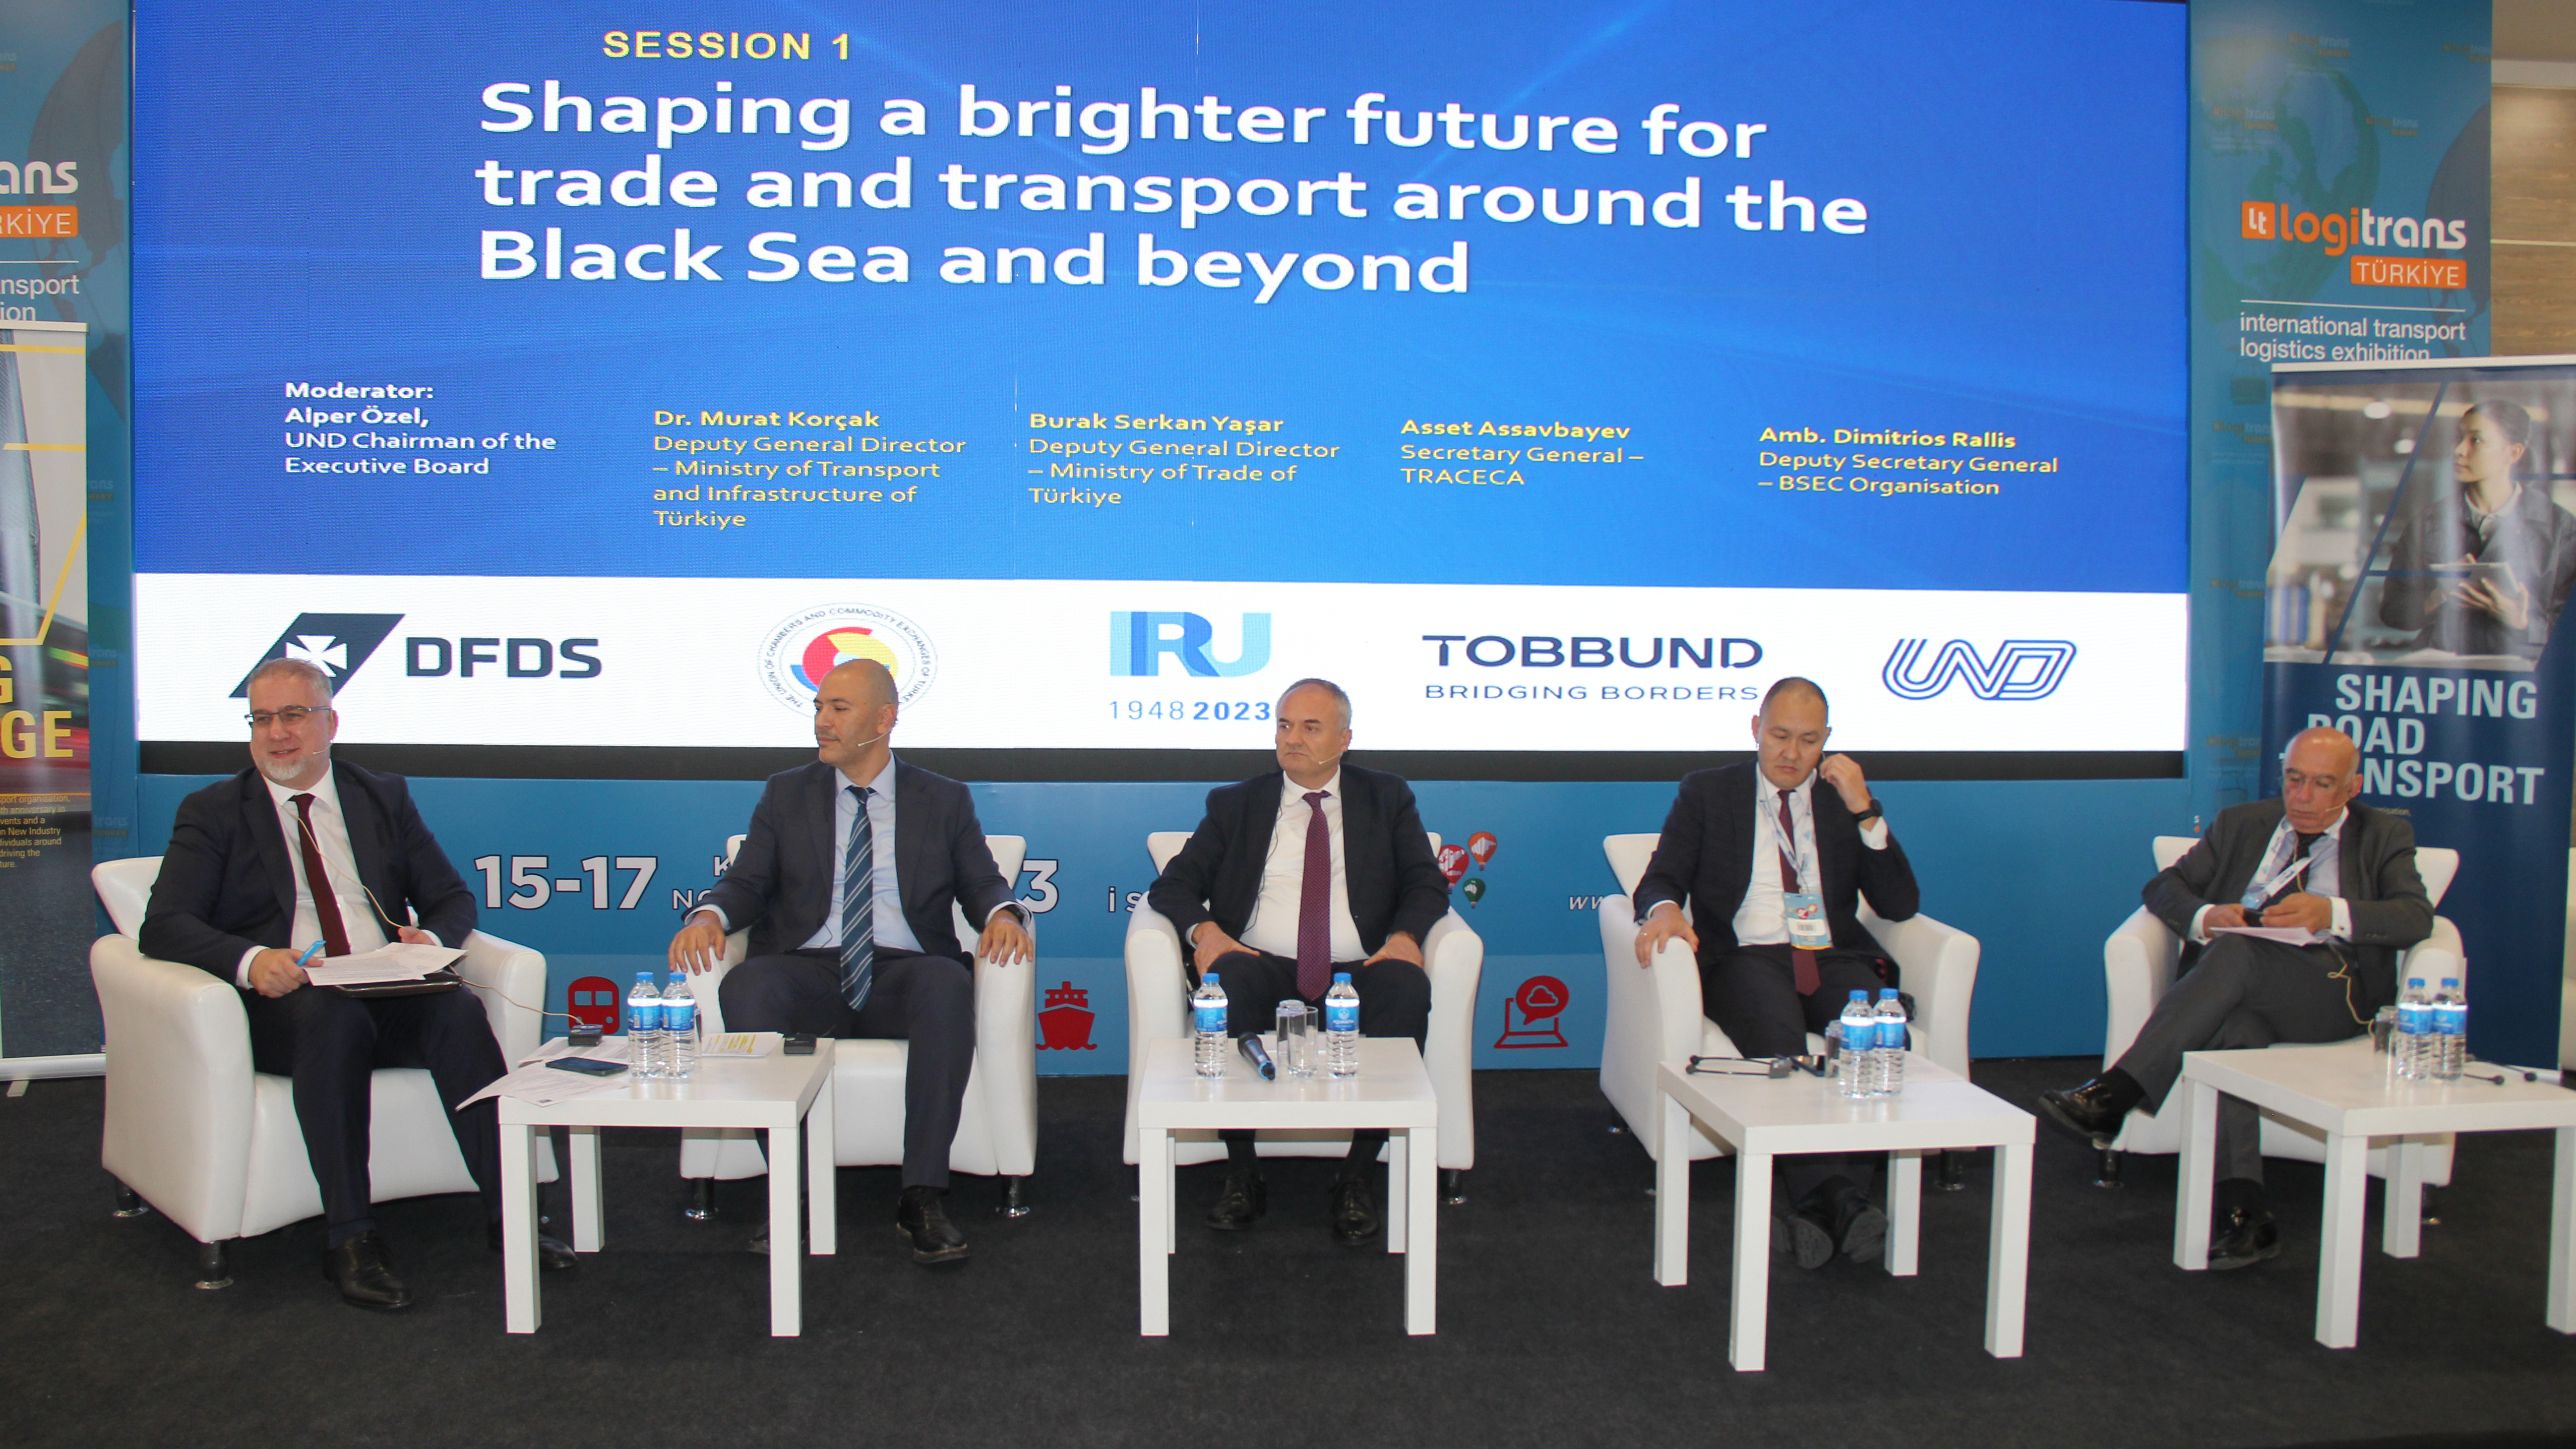 From Geneva to Istanbul: The past, present and future of road transport